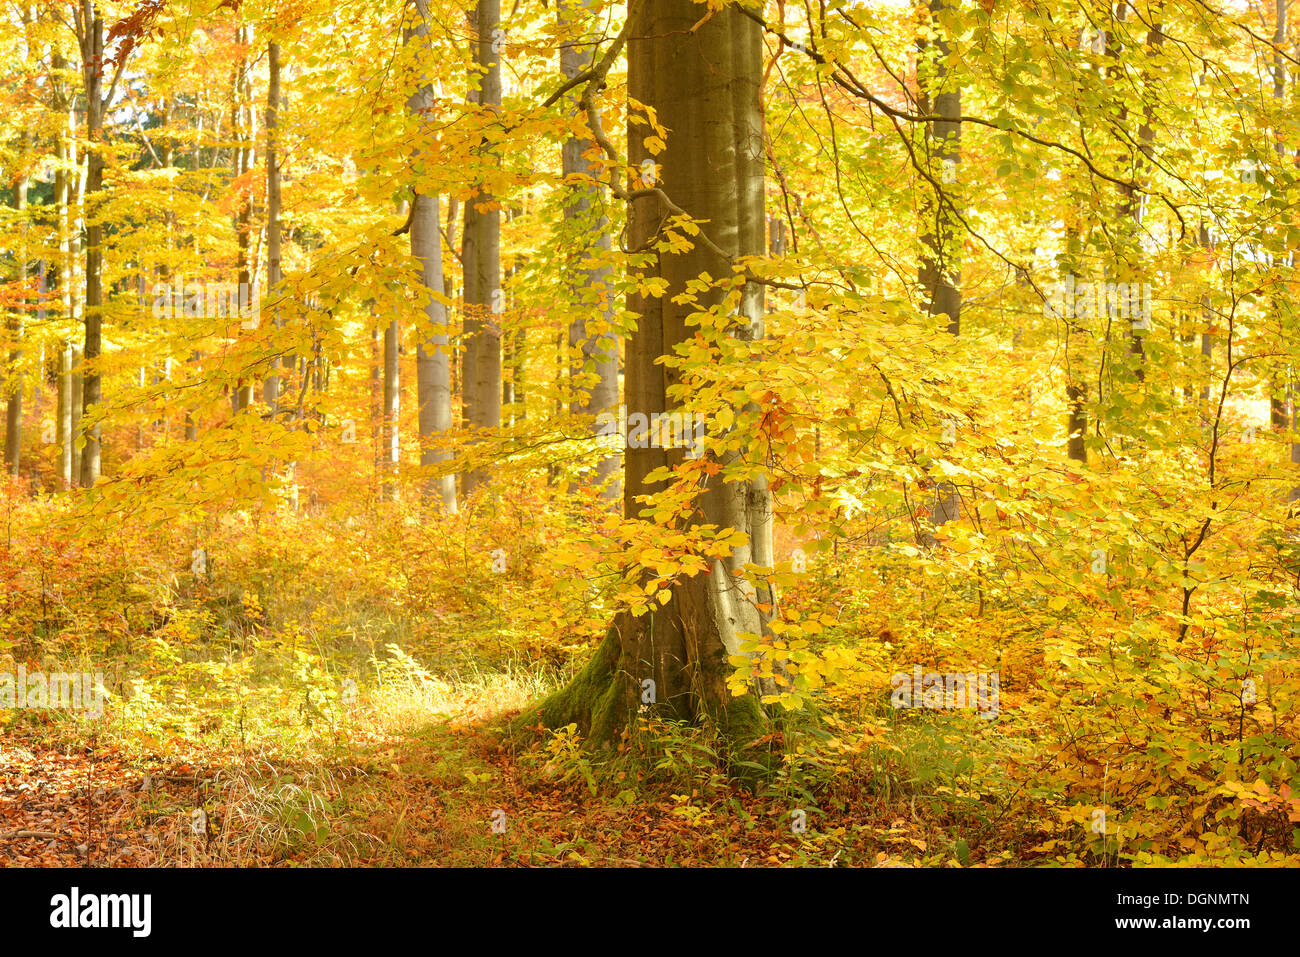 Beech forest in autumn with colourful autumn leaves, Thale, Saxony-Anhalt, Germany Stock Photo